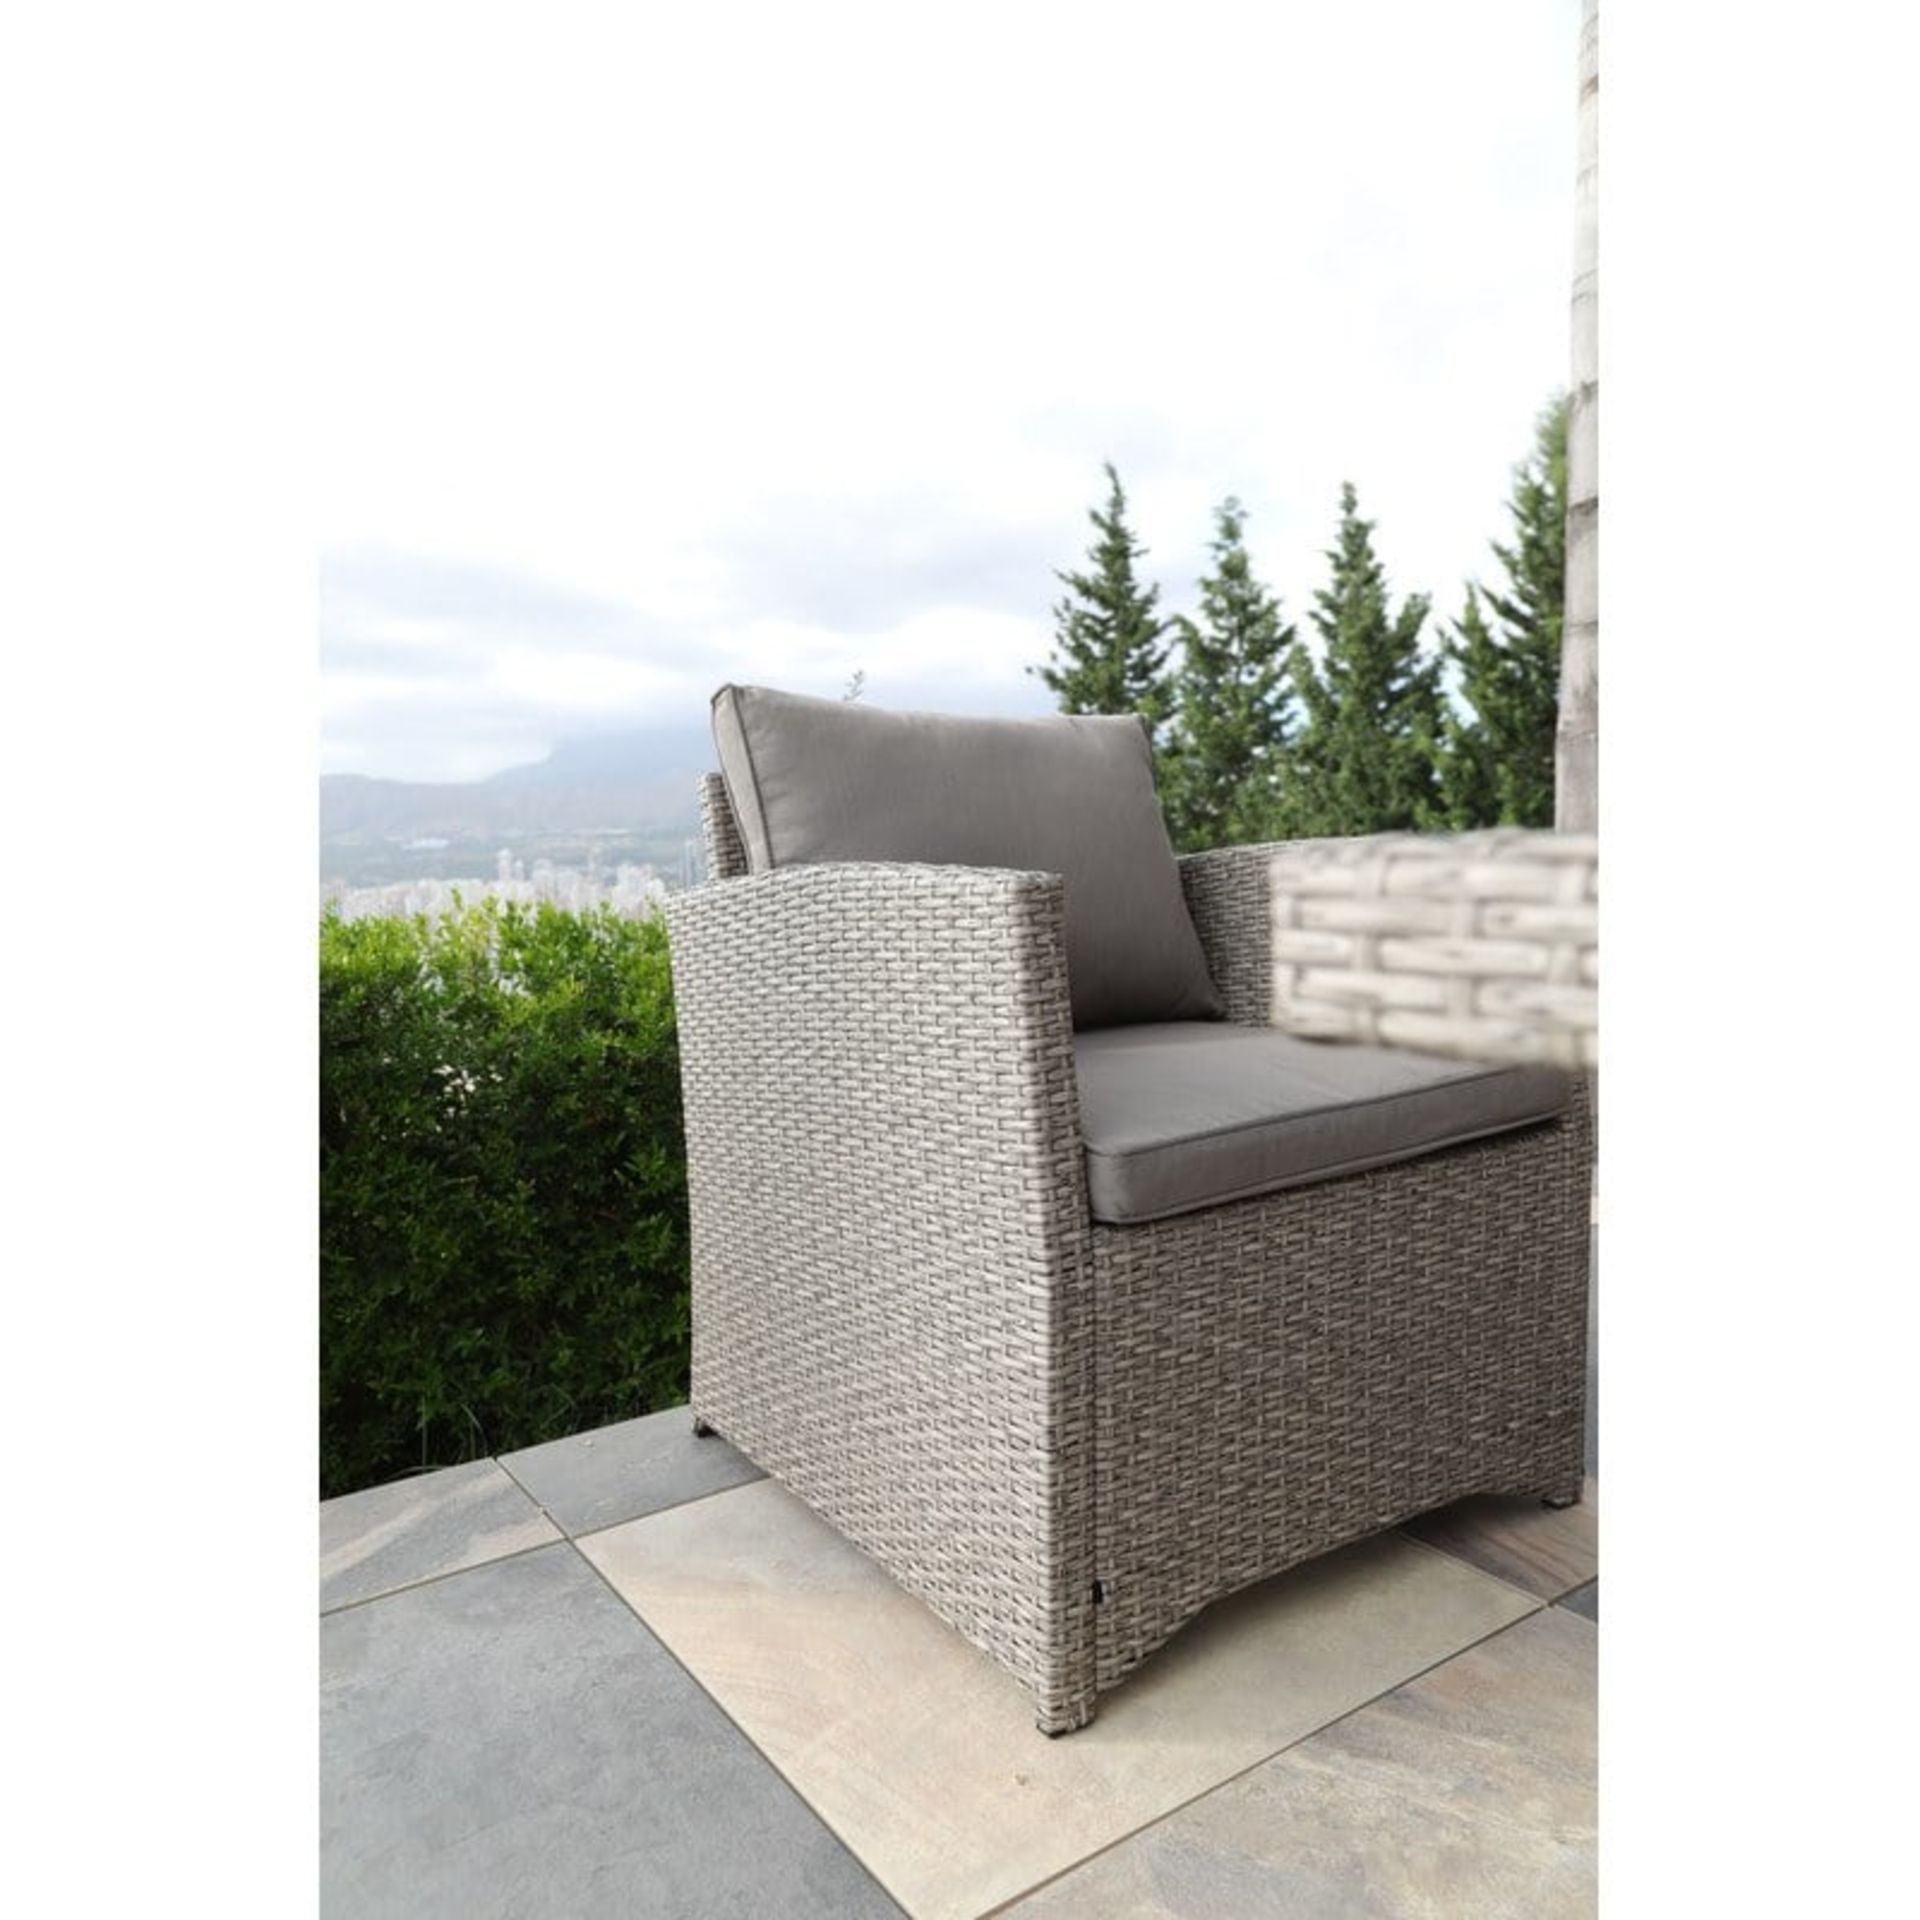 * 3 xBrand New - In Cardboard Boxes - Garden Rattan Furntiure Set. Brown wicker with Brown Cushions. - Image 5 of 11